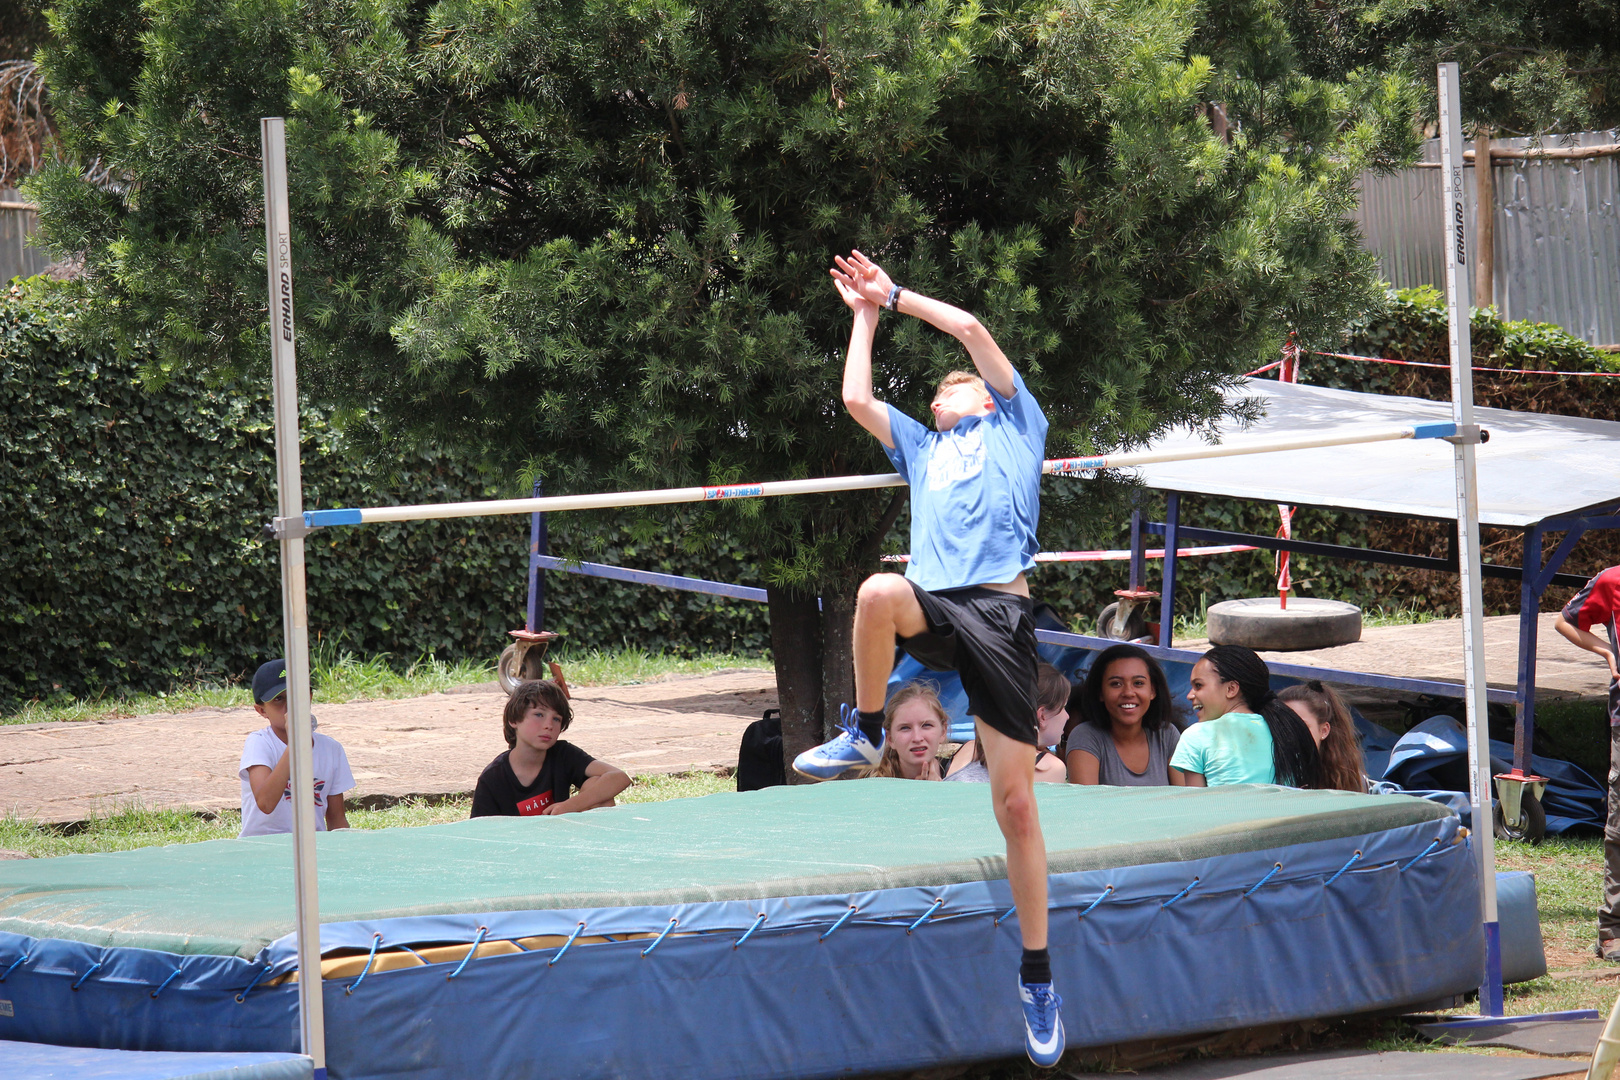 Hands in the high jump # 5